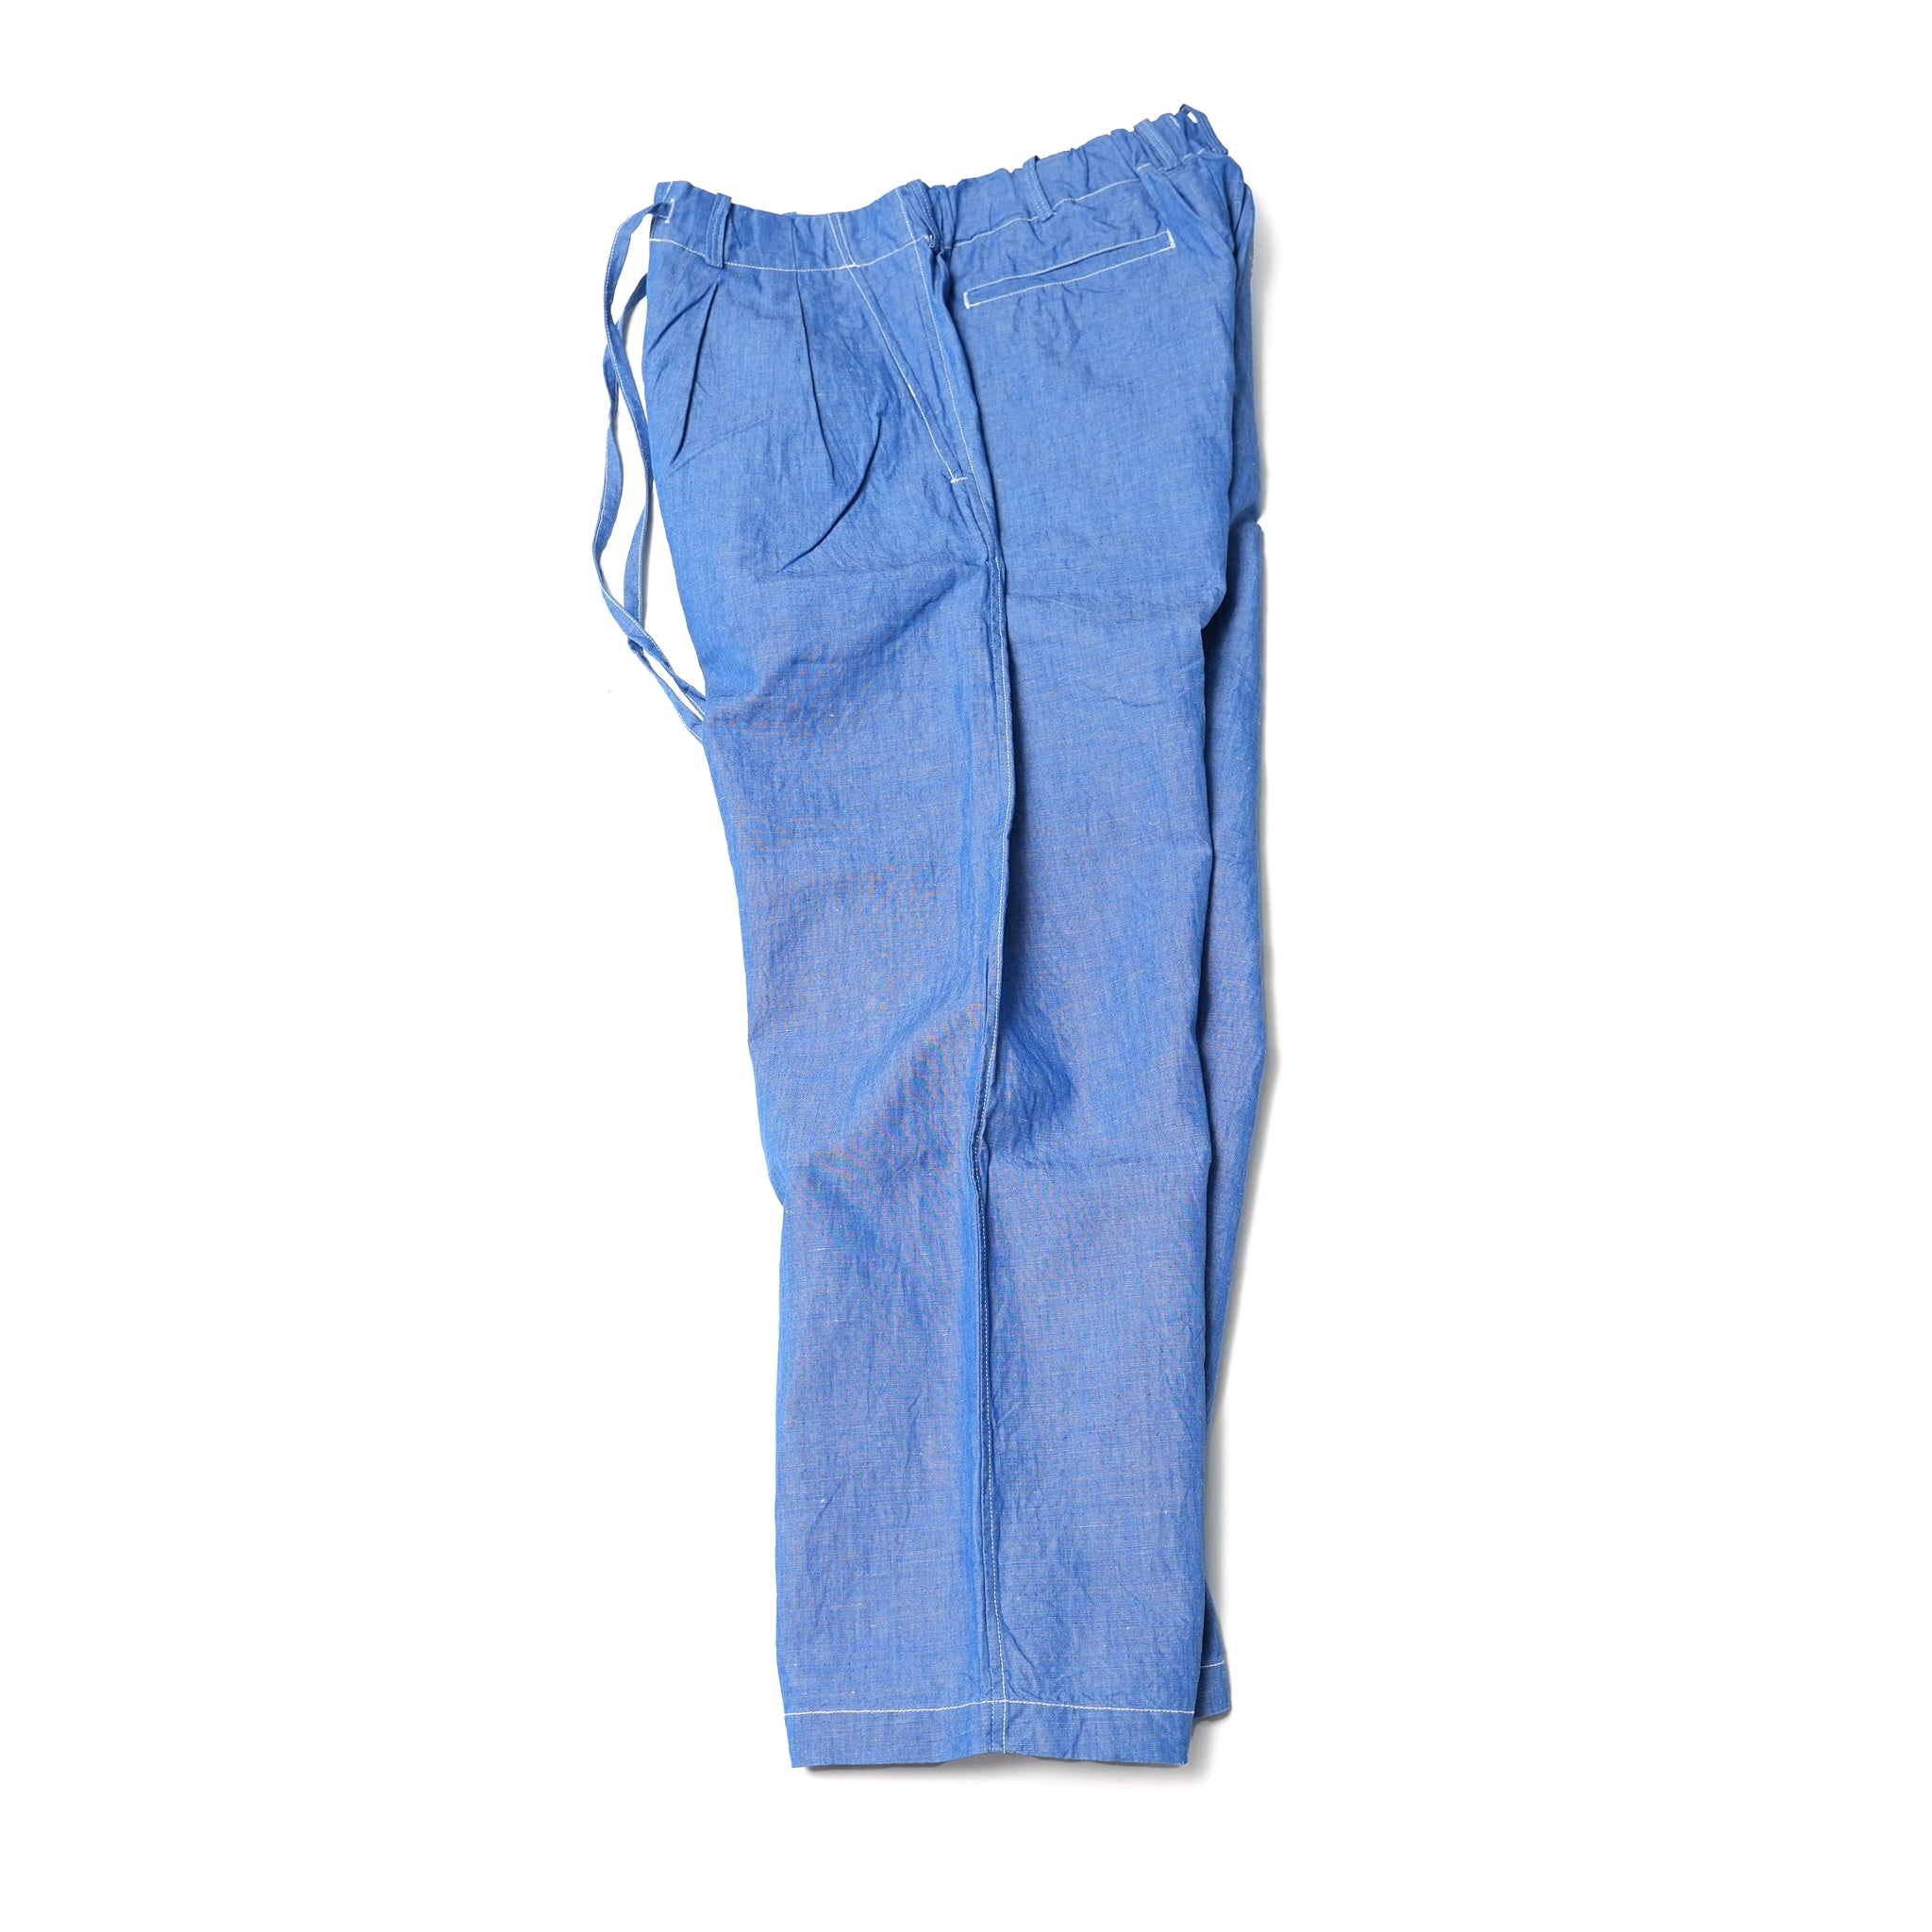 No:be-03_2023ss | Name:bags easy pants | Color:White/Blue/Black【CATTA_カッタ】